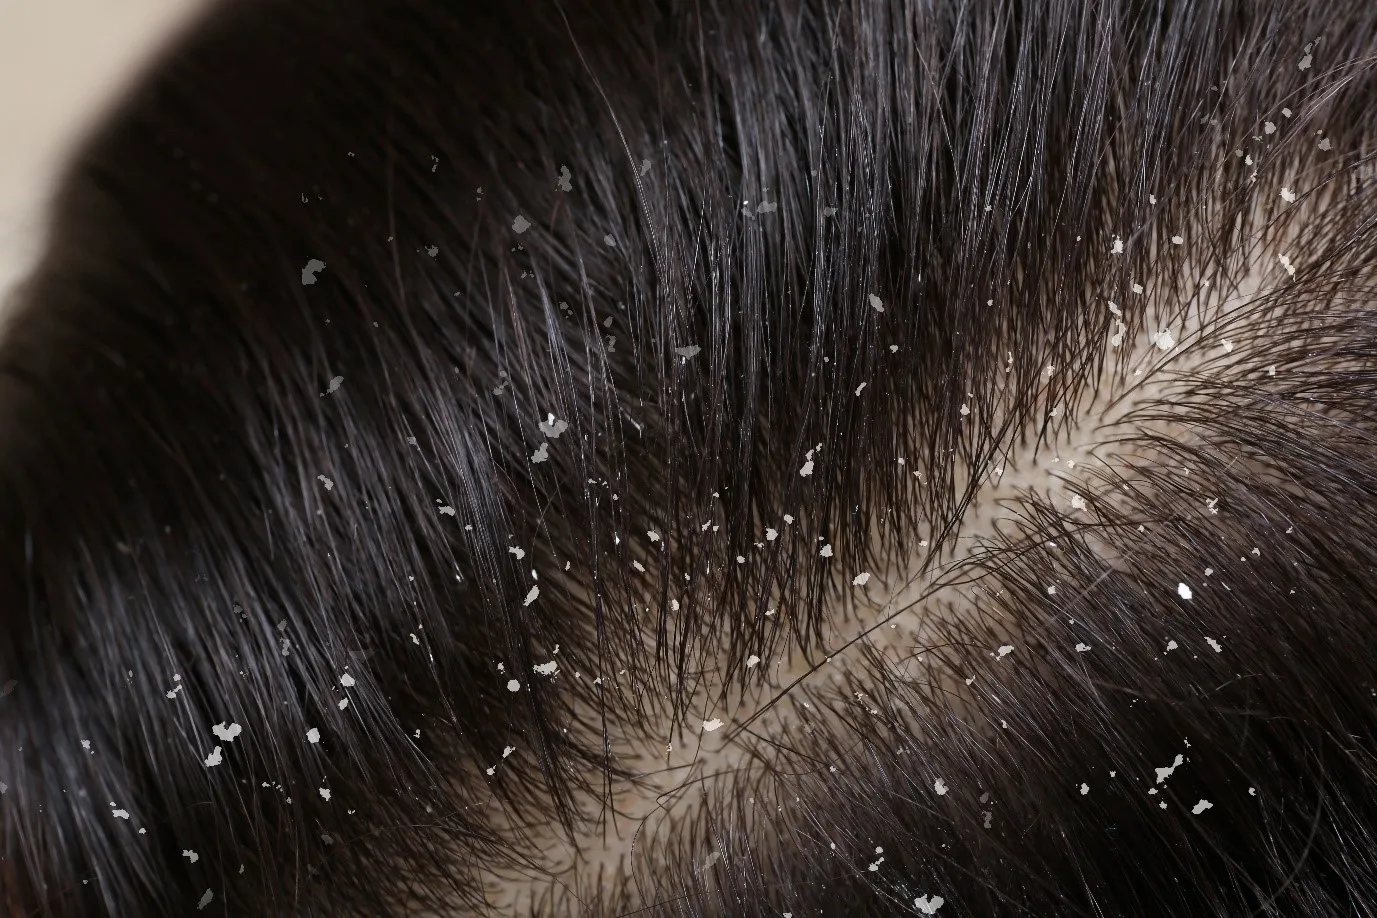 Learn difference between White piedra and Dandruff